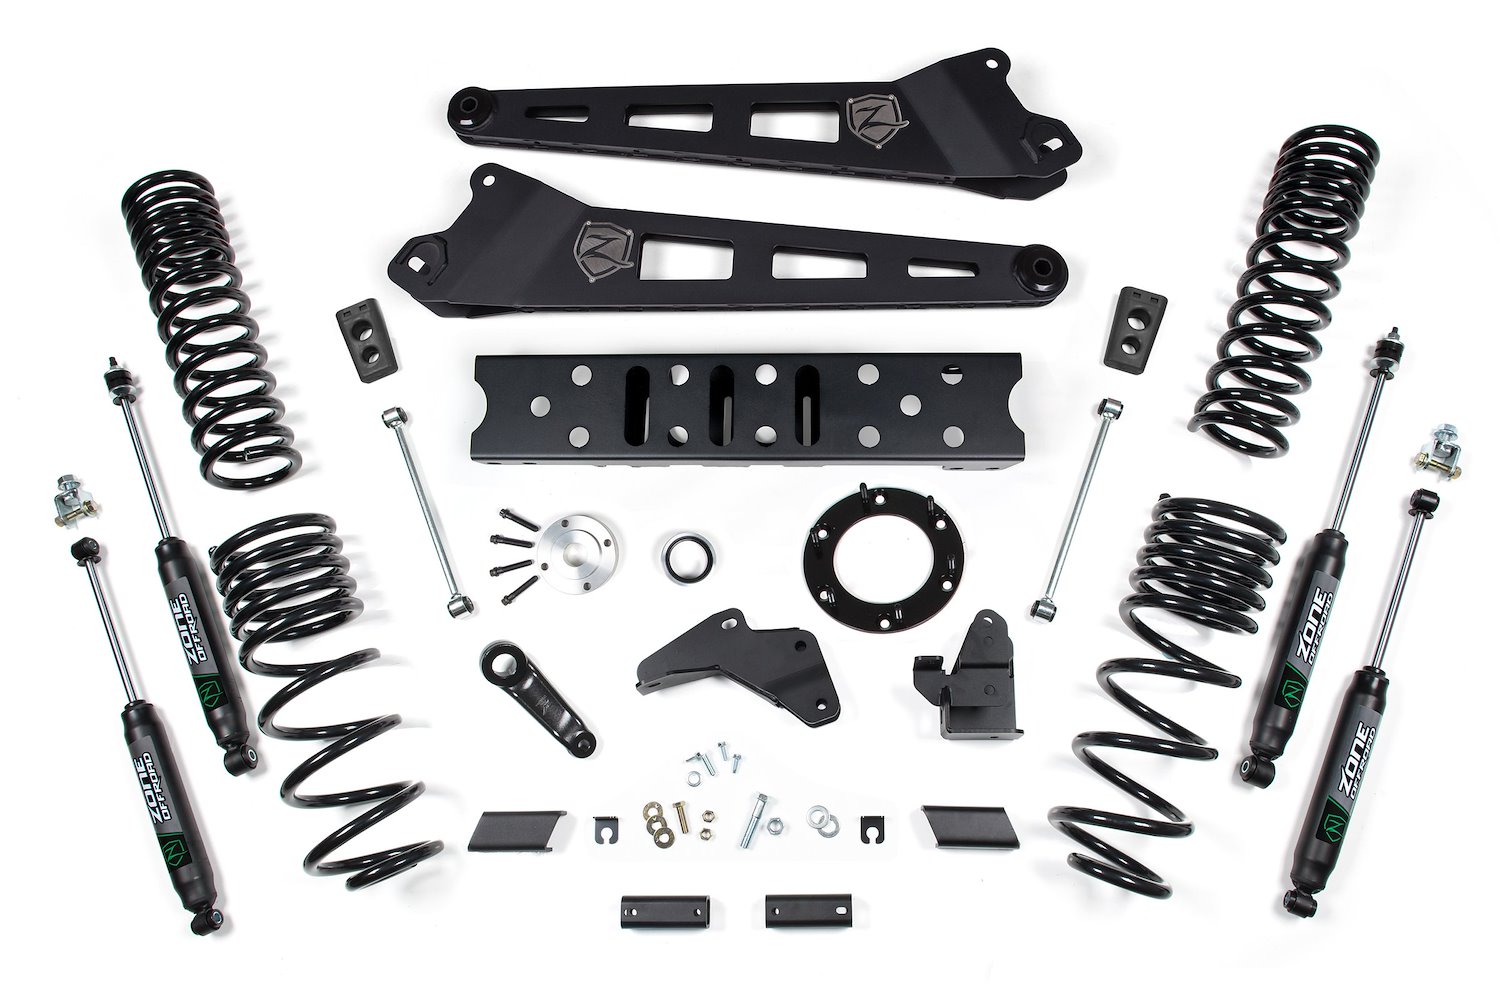 ZOND118N Zone 6.5" Radius Arm Lift Kit - Diesel for Fits Select Ram 2500